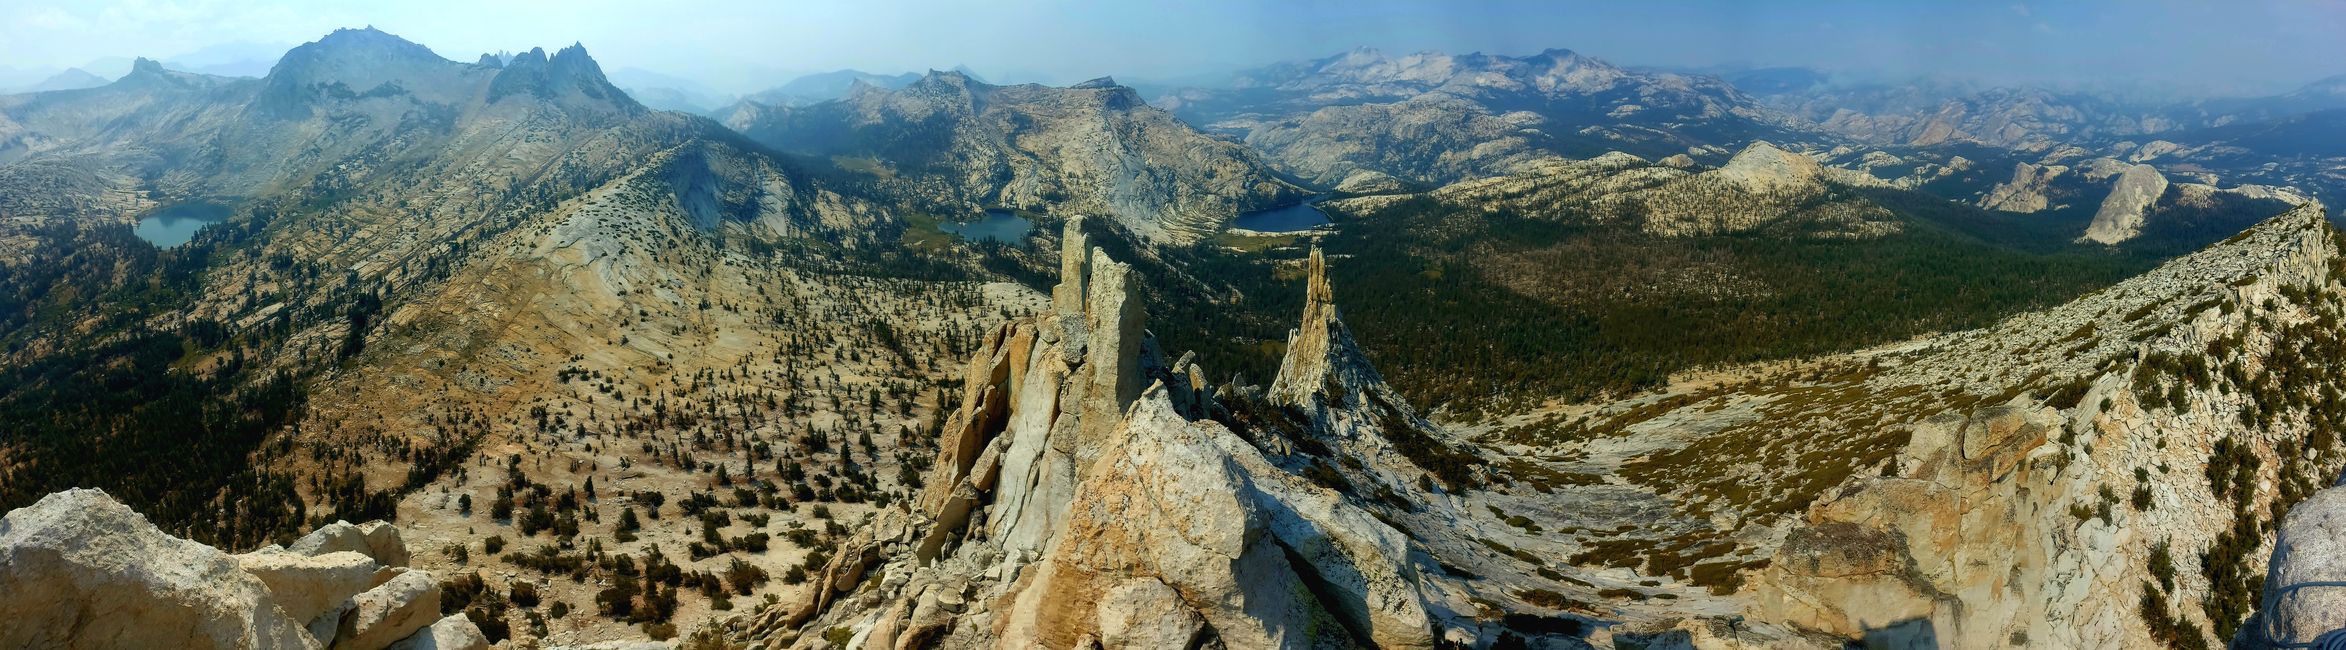 Panorama from Cathedral Peak, with the imposing Eichorn's Pinnacle